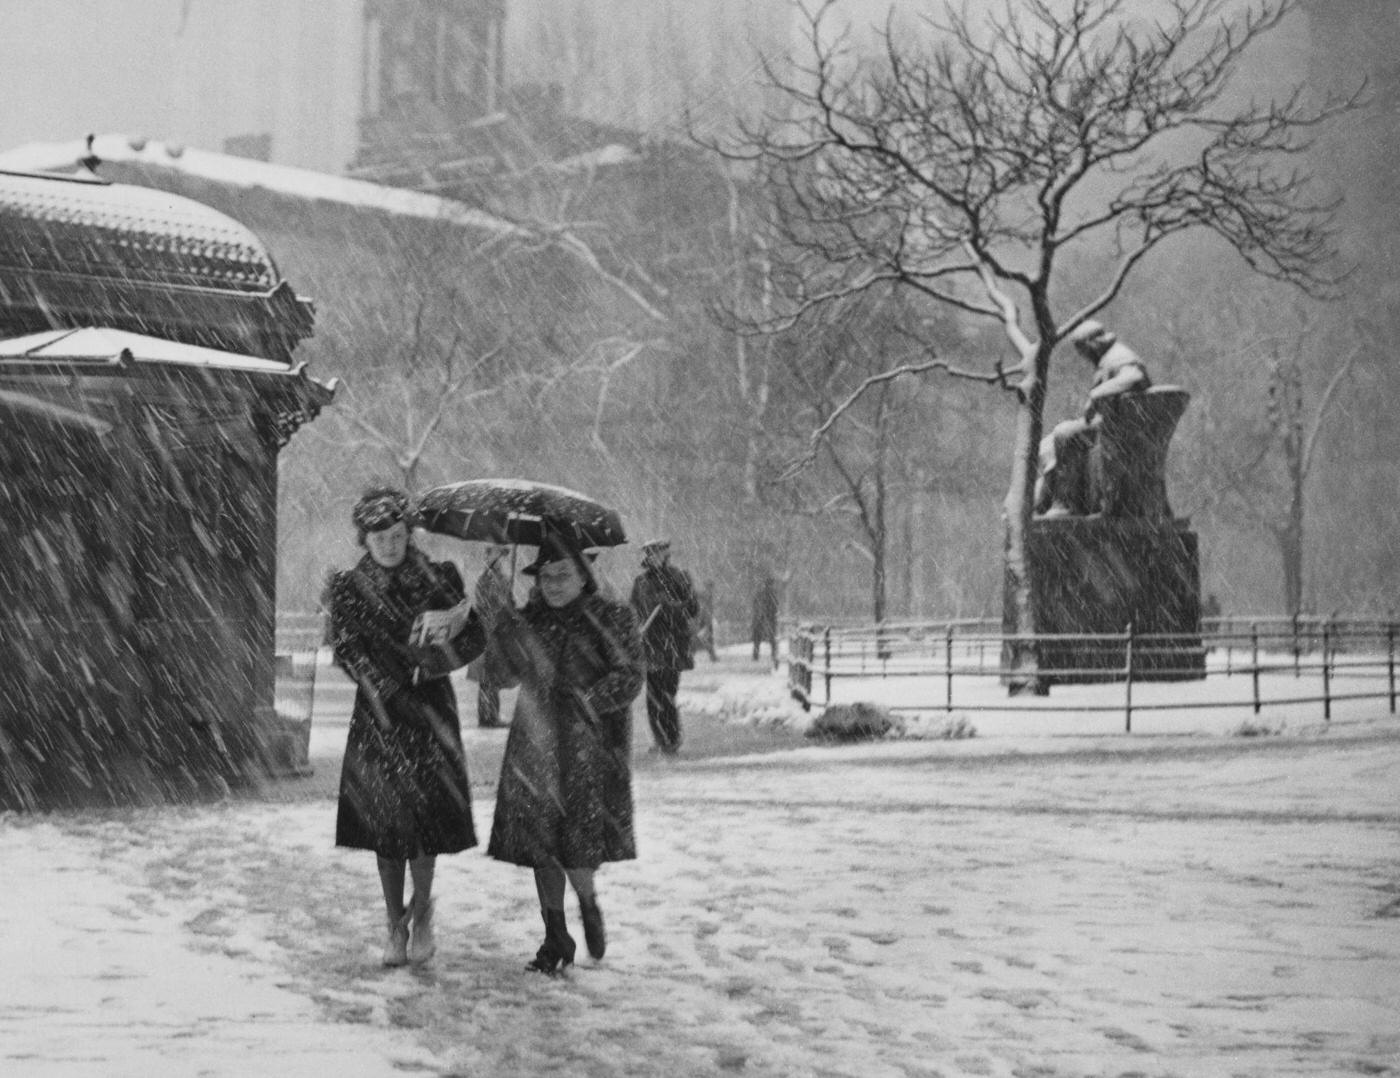 Pedestrians Sheltering From Snow And Freezing Rain In Herald Square, Manhattan, March 1940